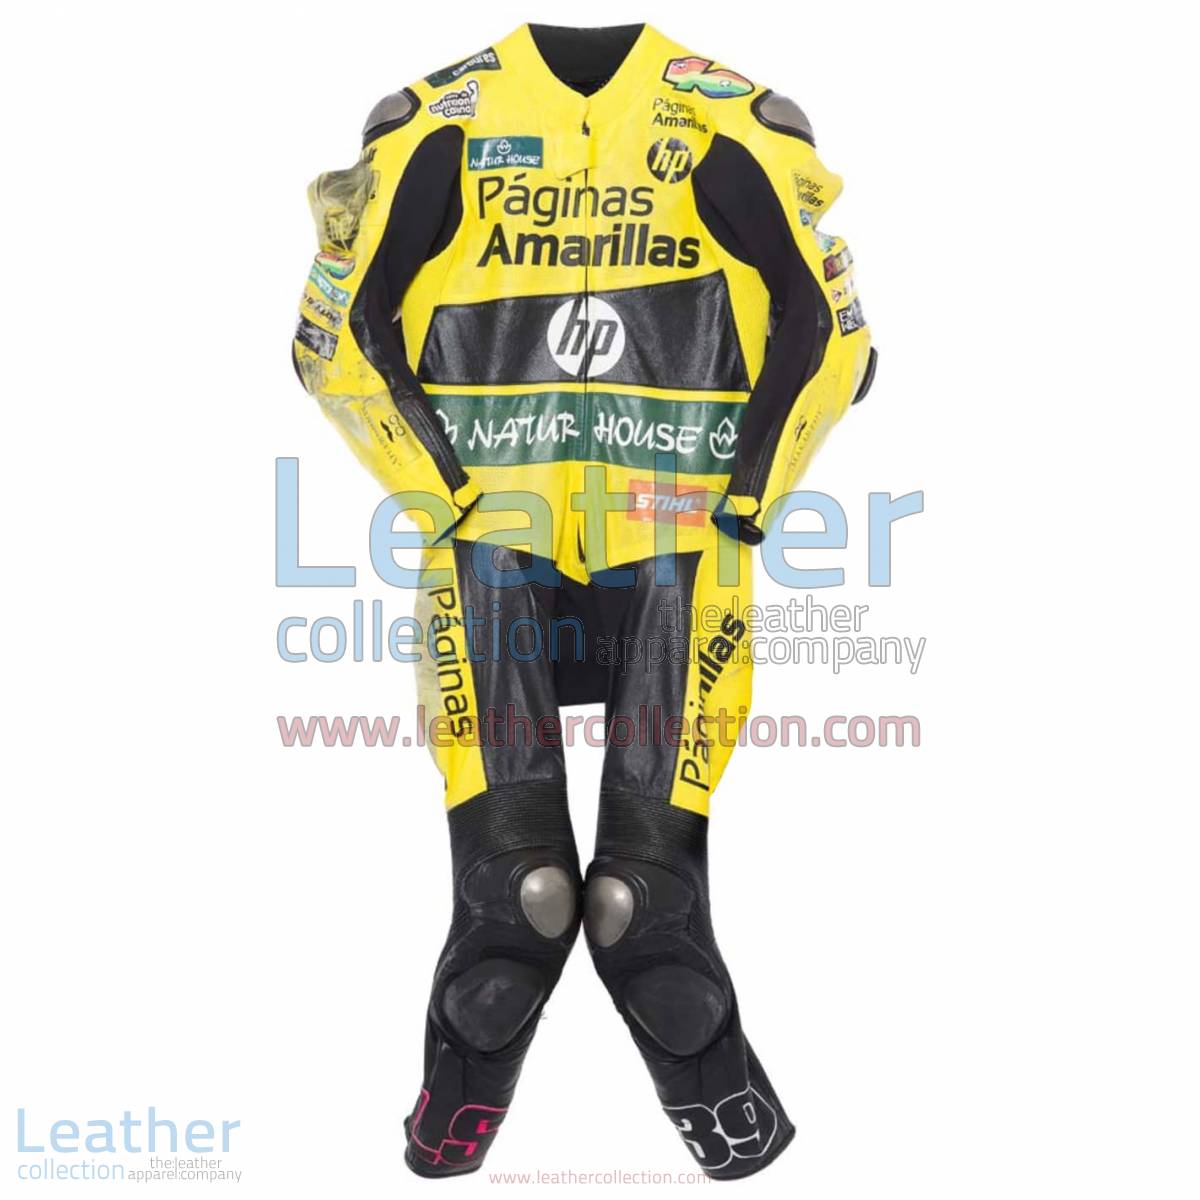 Luis Salom 2014 Motorcycle Leathers | motorcycle apparel,motorcycle leathers